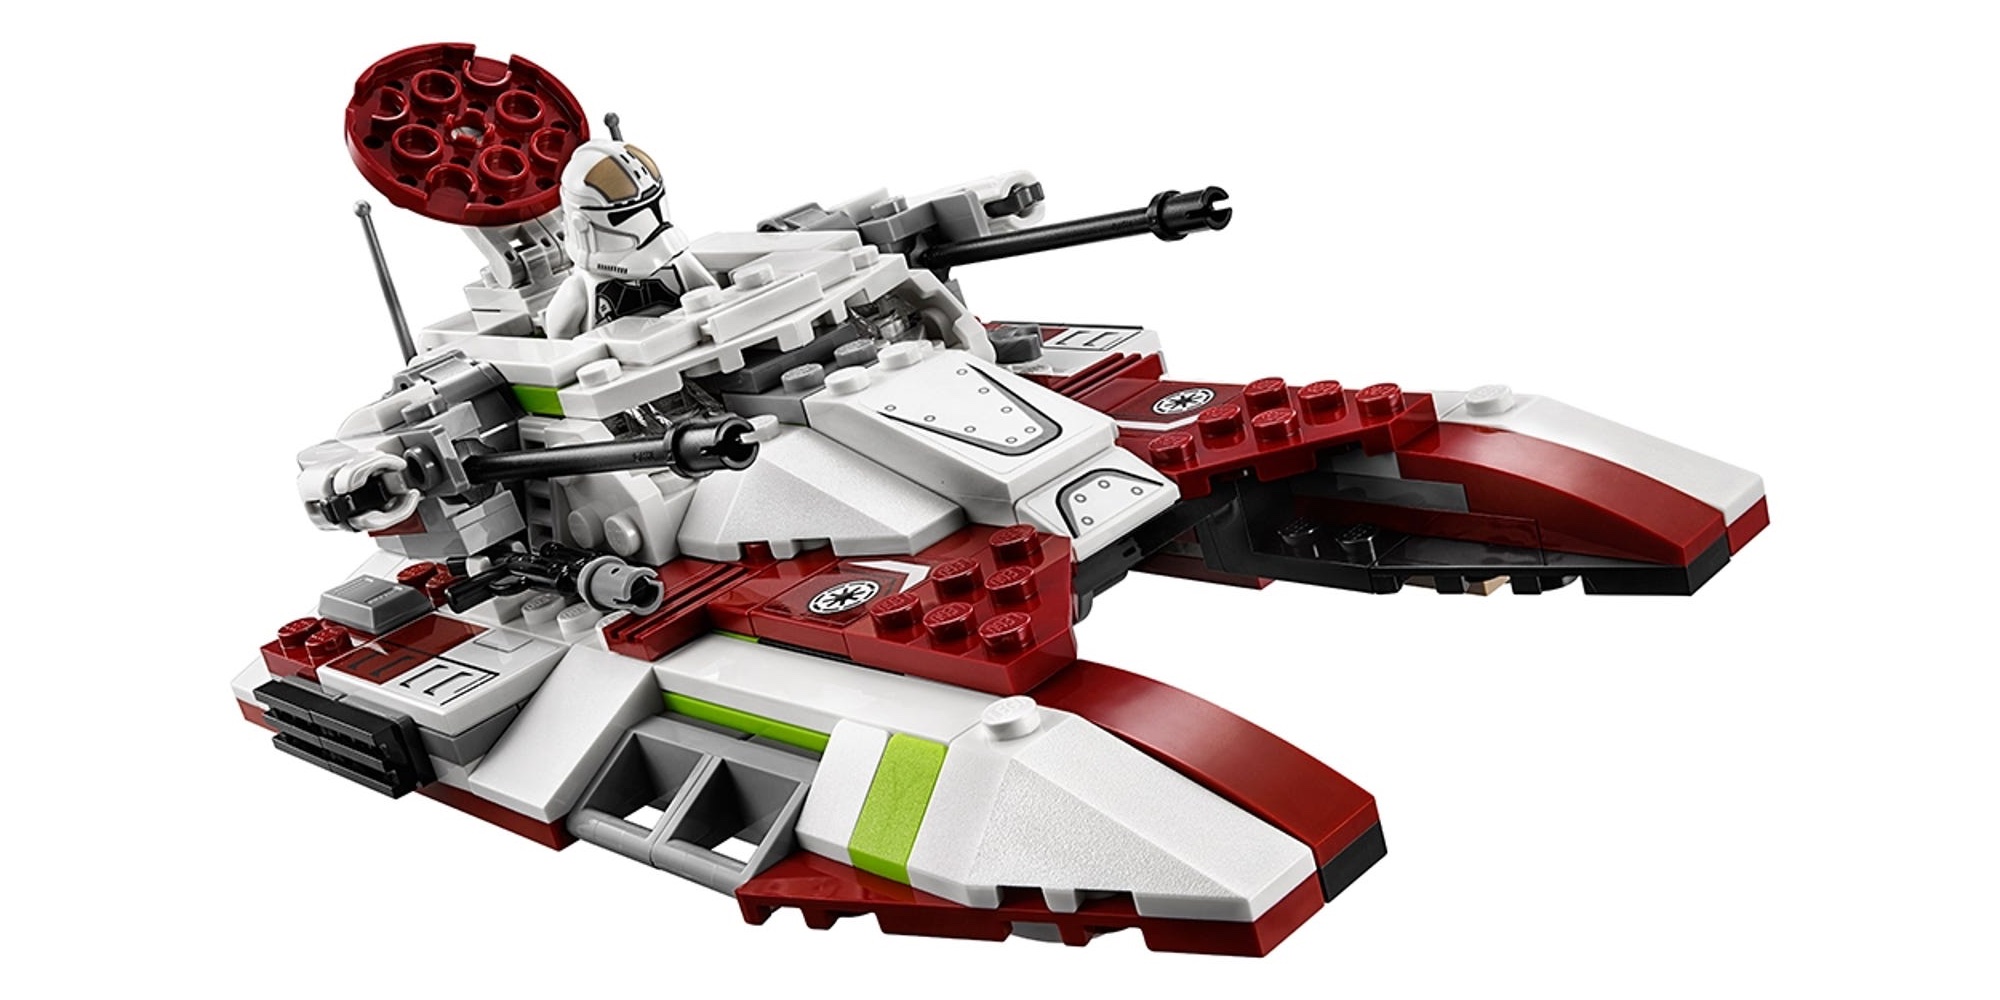 https://9to5toys.com/wp-content/uploads/sites/5/2022/03/lego-republic-fighter-tank.jpg